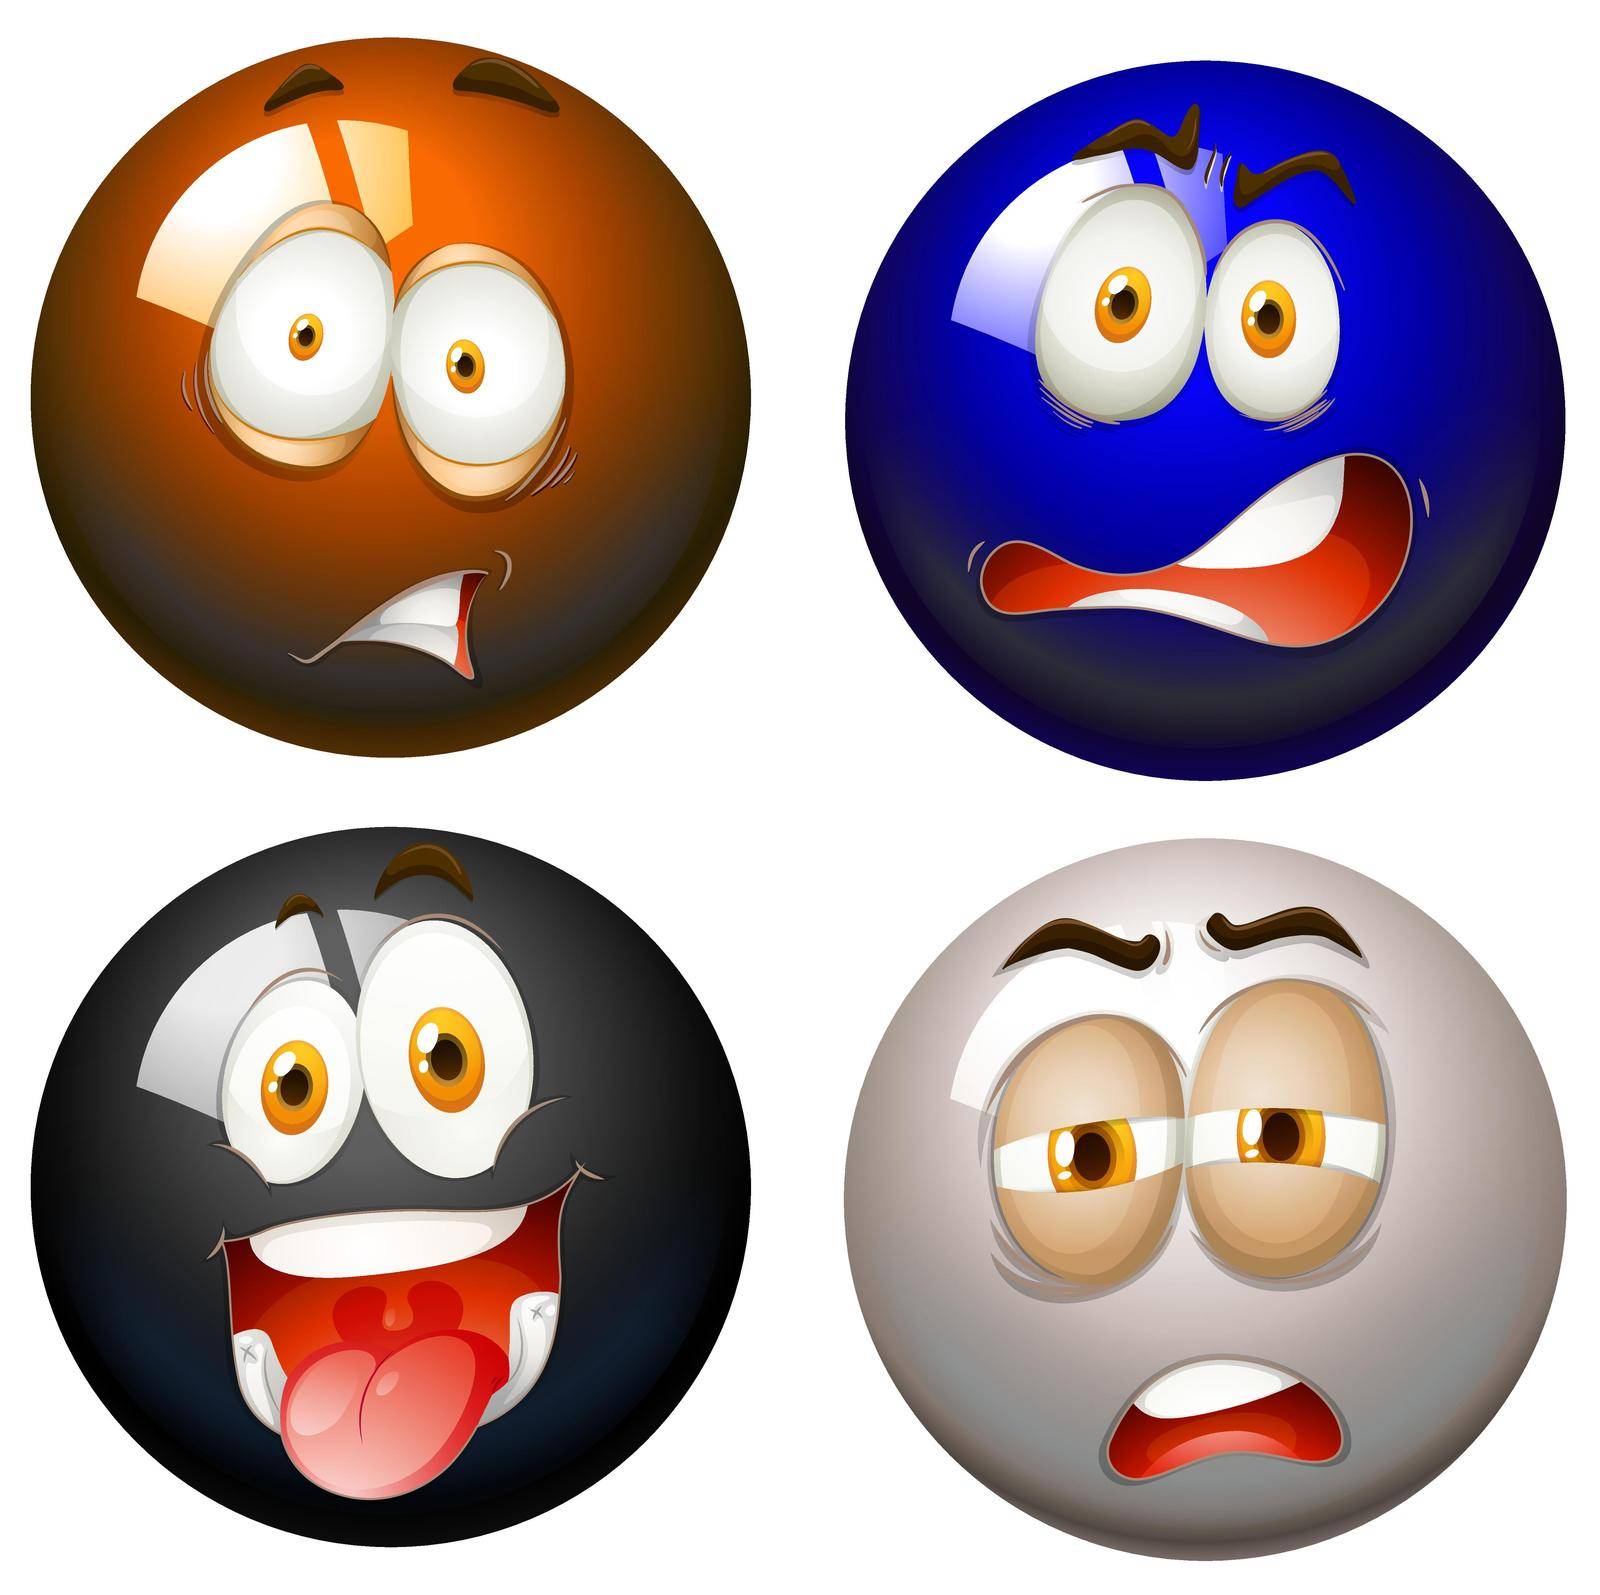 Snooker balls with facial expressions by iimages